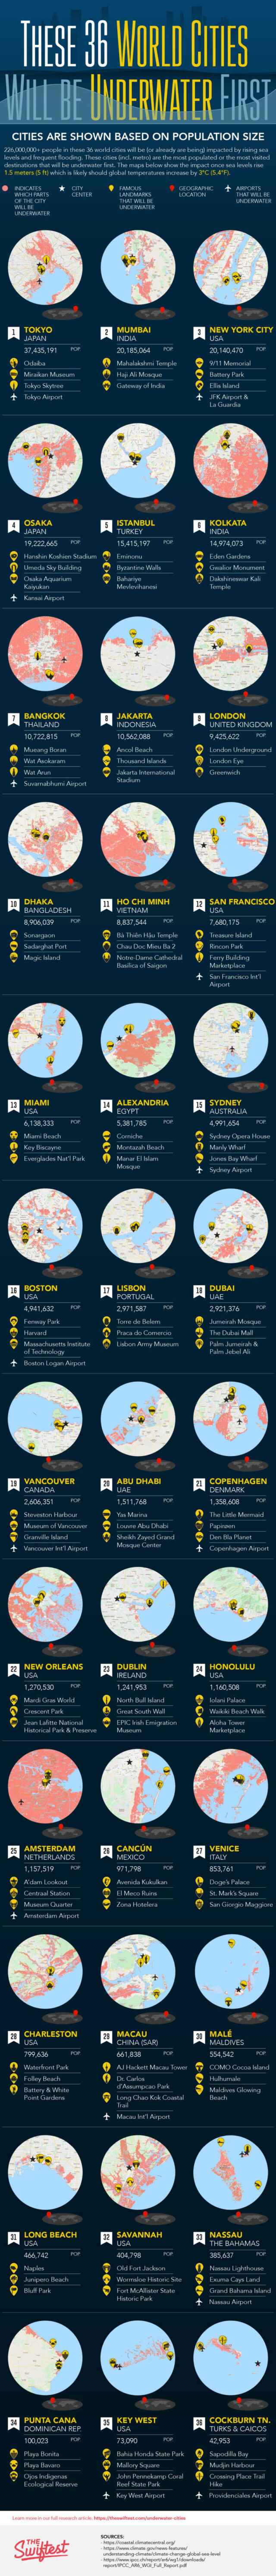 These 36 World Cities will be Underwater First